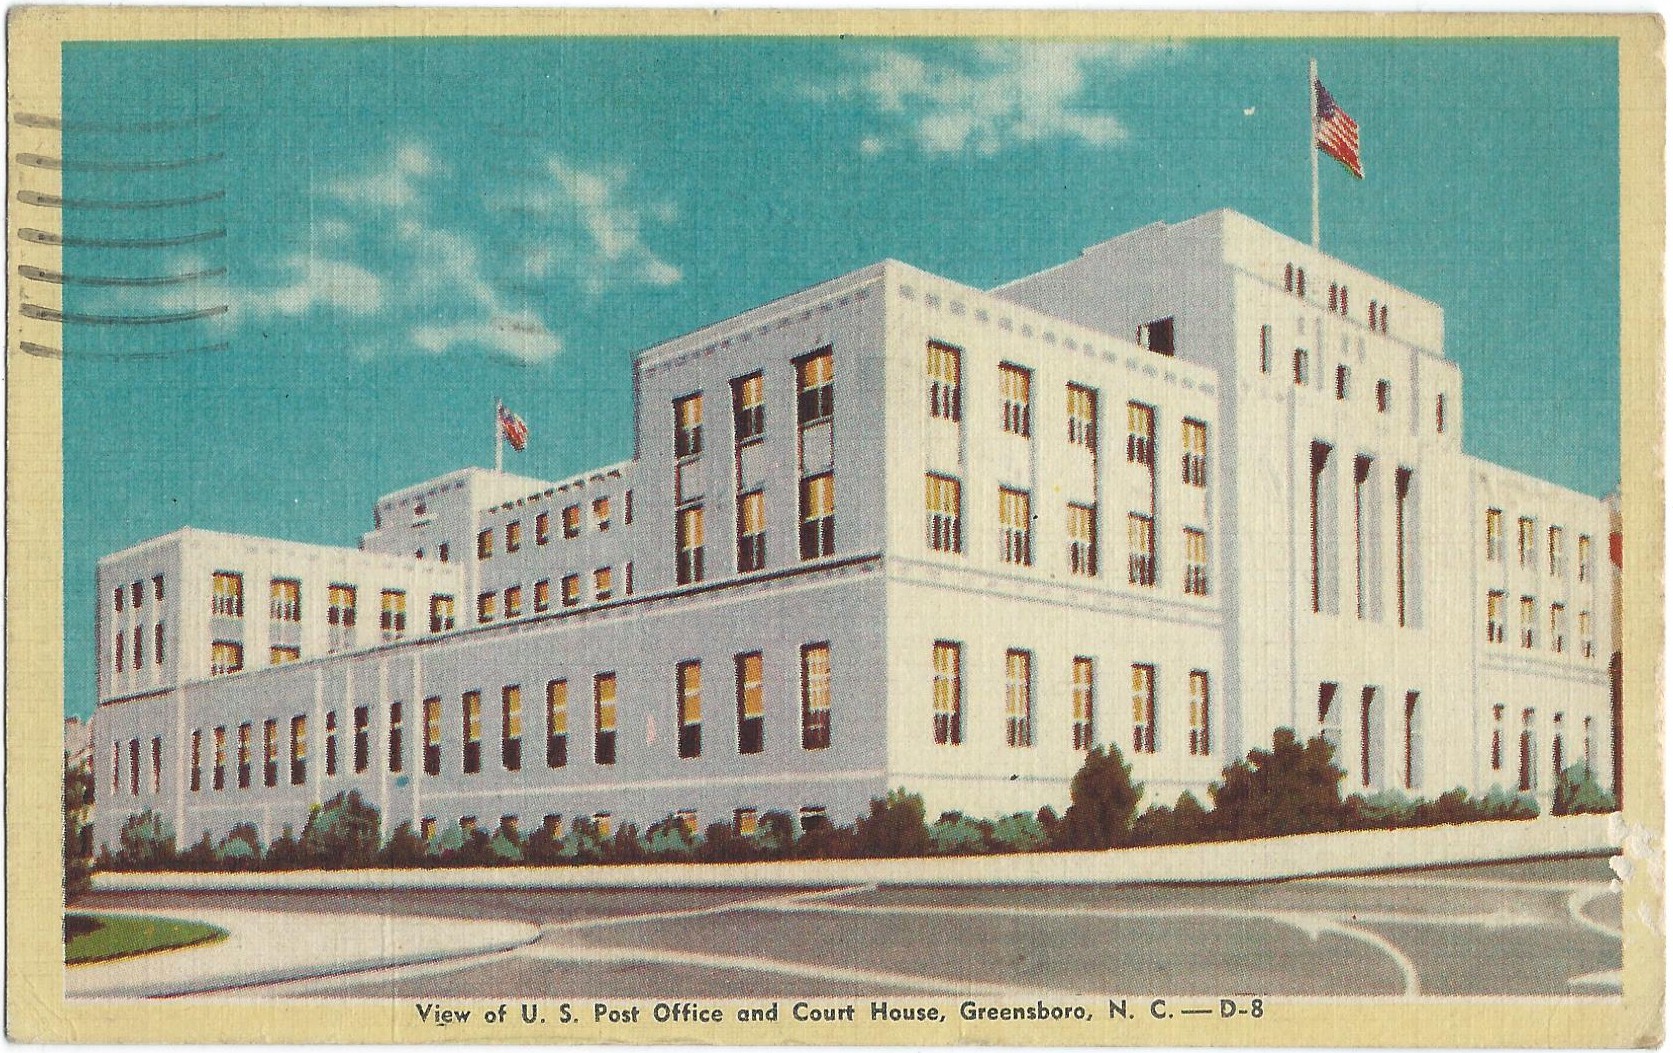 View of U.S. Post Office and Court House Greensboro N.C. 27247